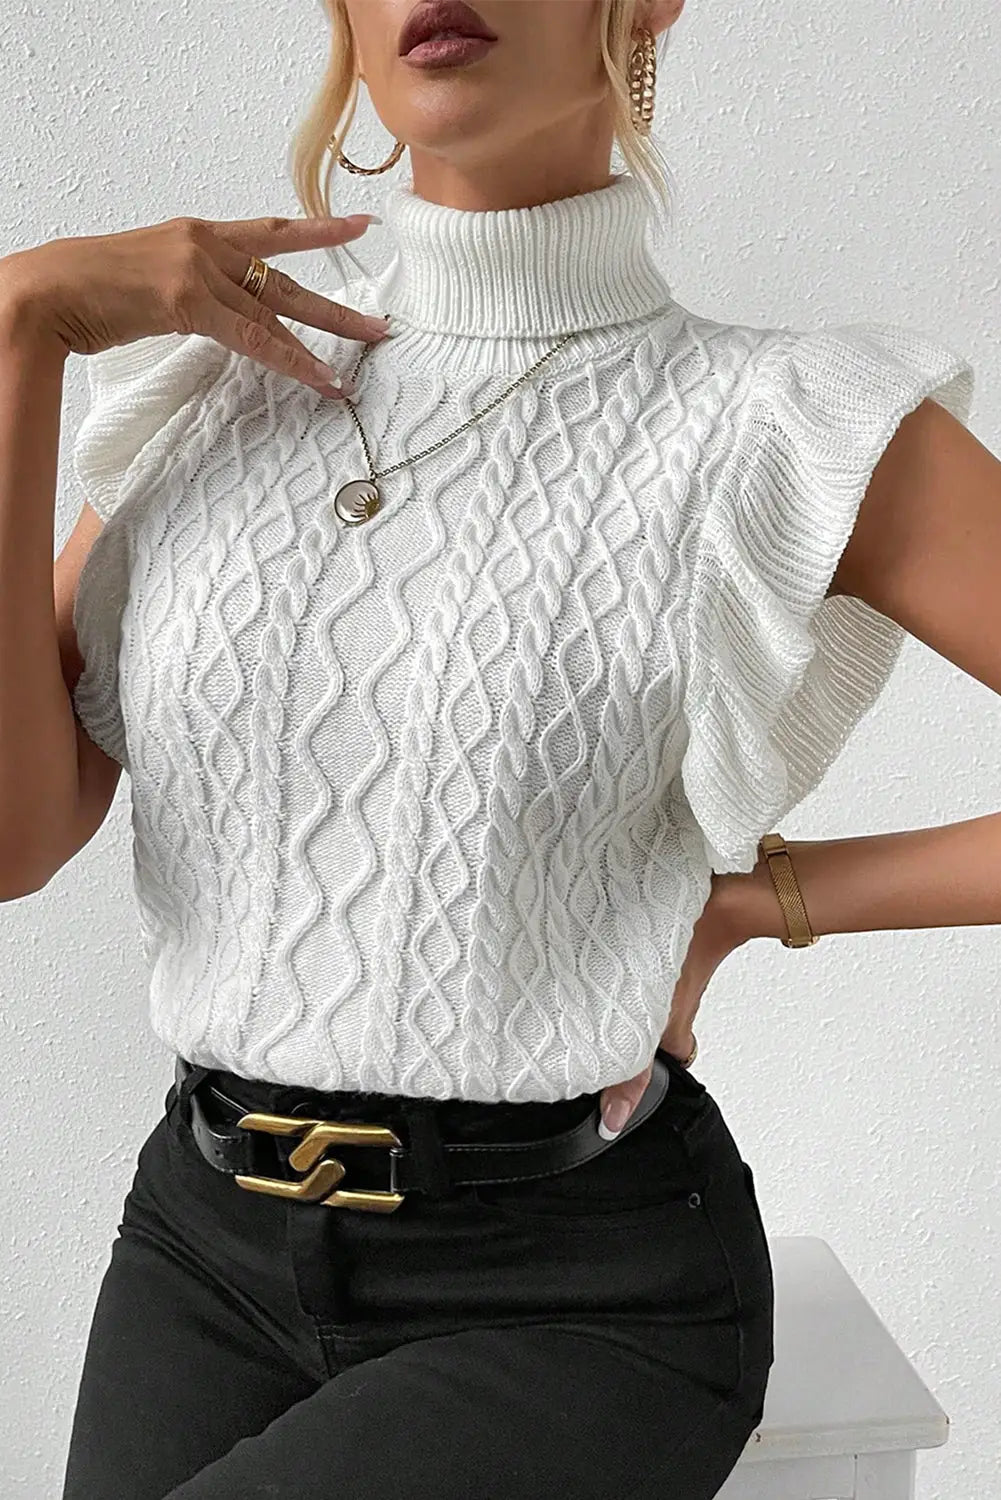 White turtle neck short sleeve cable knit ruffled sweater - sweaters & cardigans